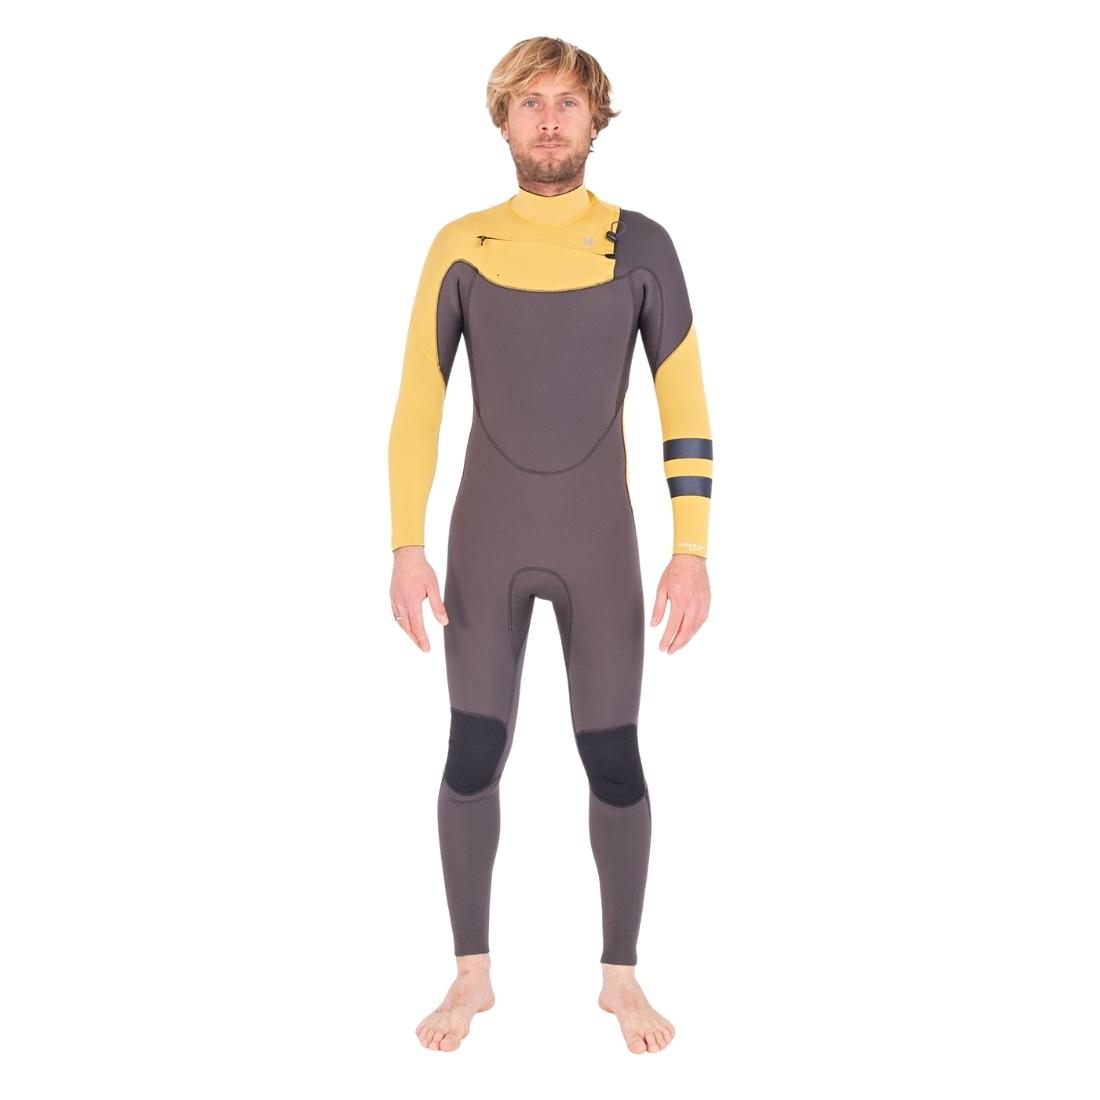 Hurley Mens Advantage 3/2mm Wetsuit - Marigold - Mens Full Length Wetsuit by Hurley